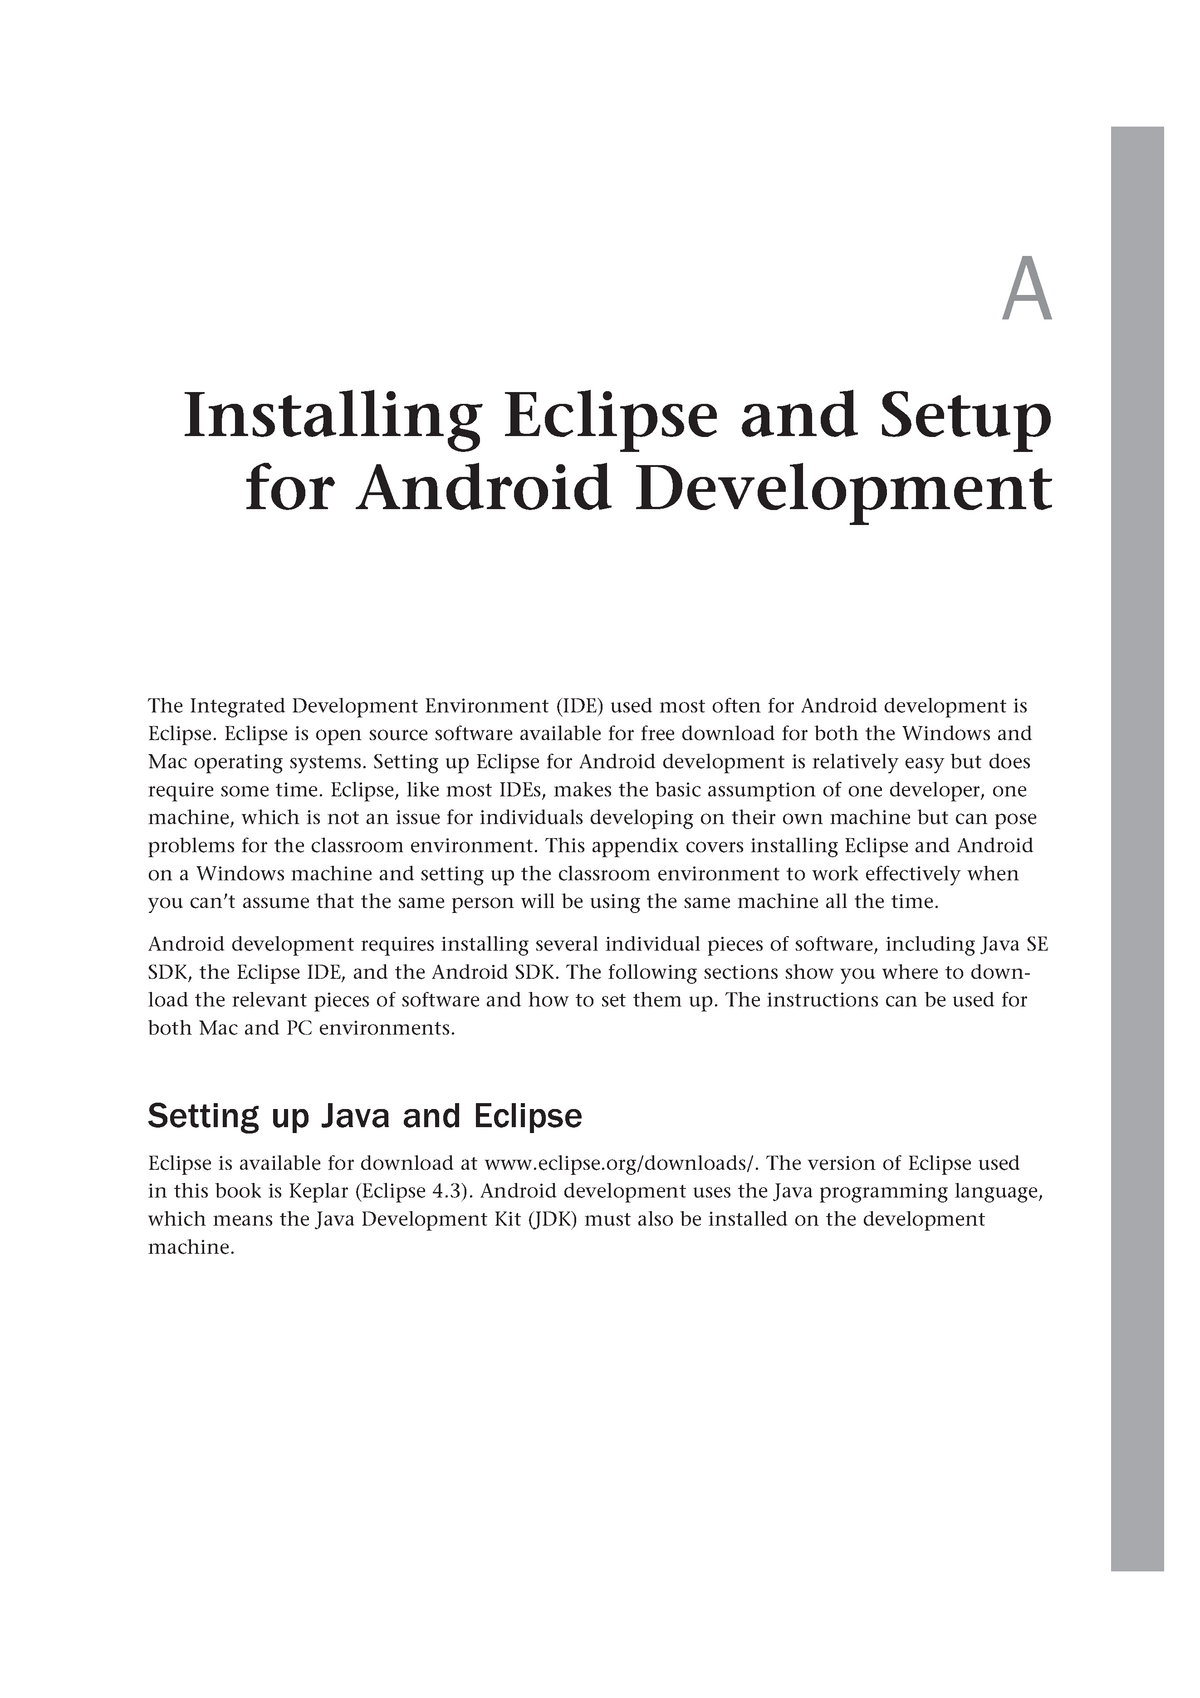 install eclispe for android developppment on mac